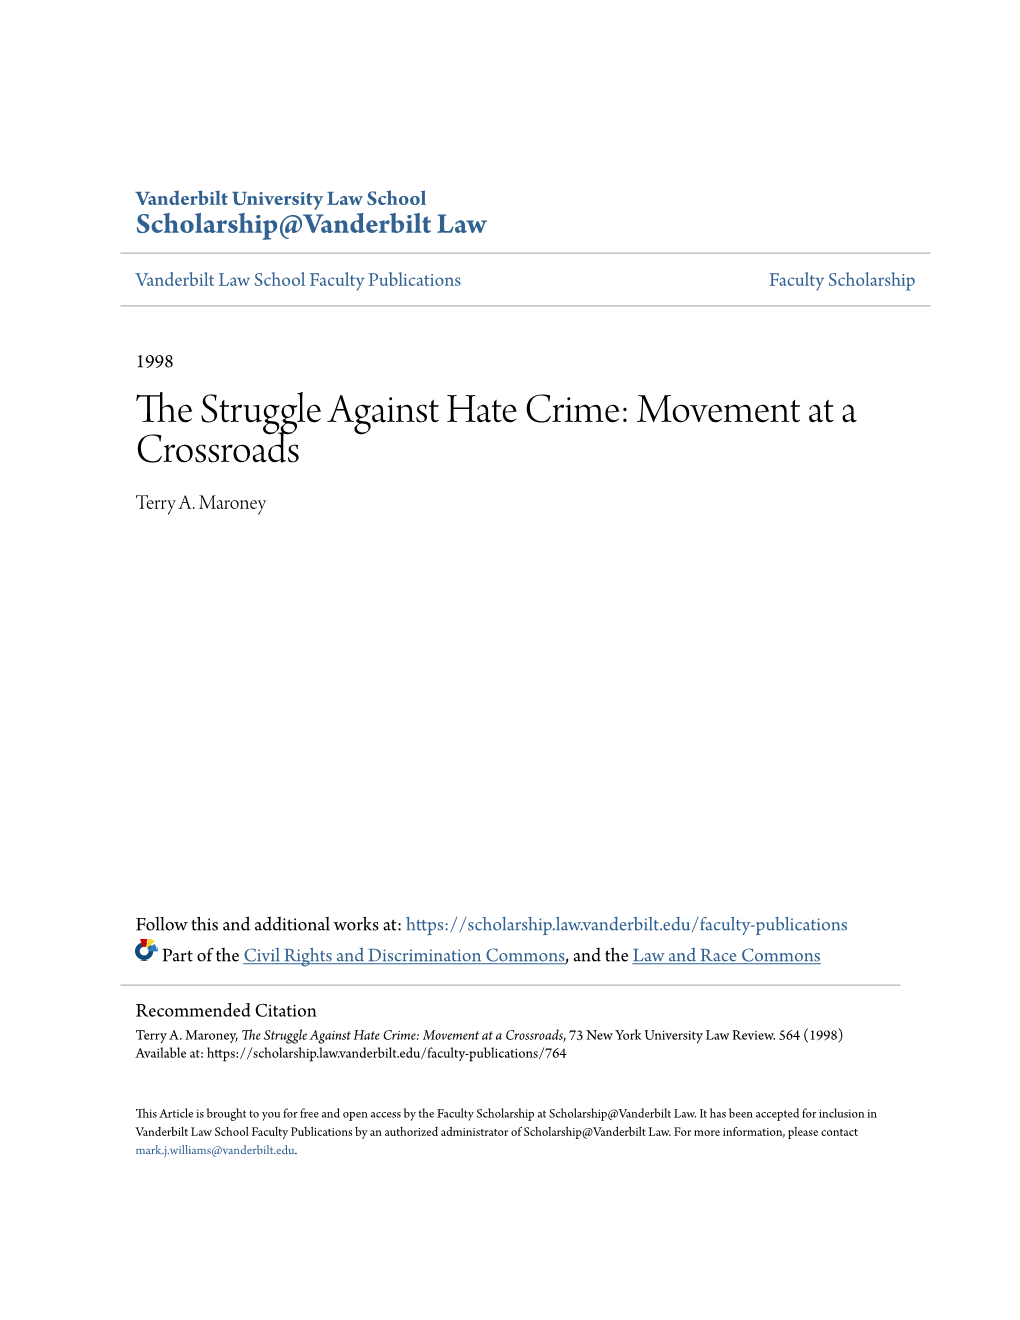 The Struggle Against Hate Crime: Movement at a Crossroads, 73 New York University Law Review